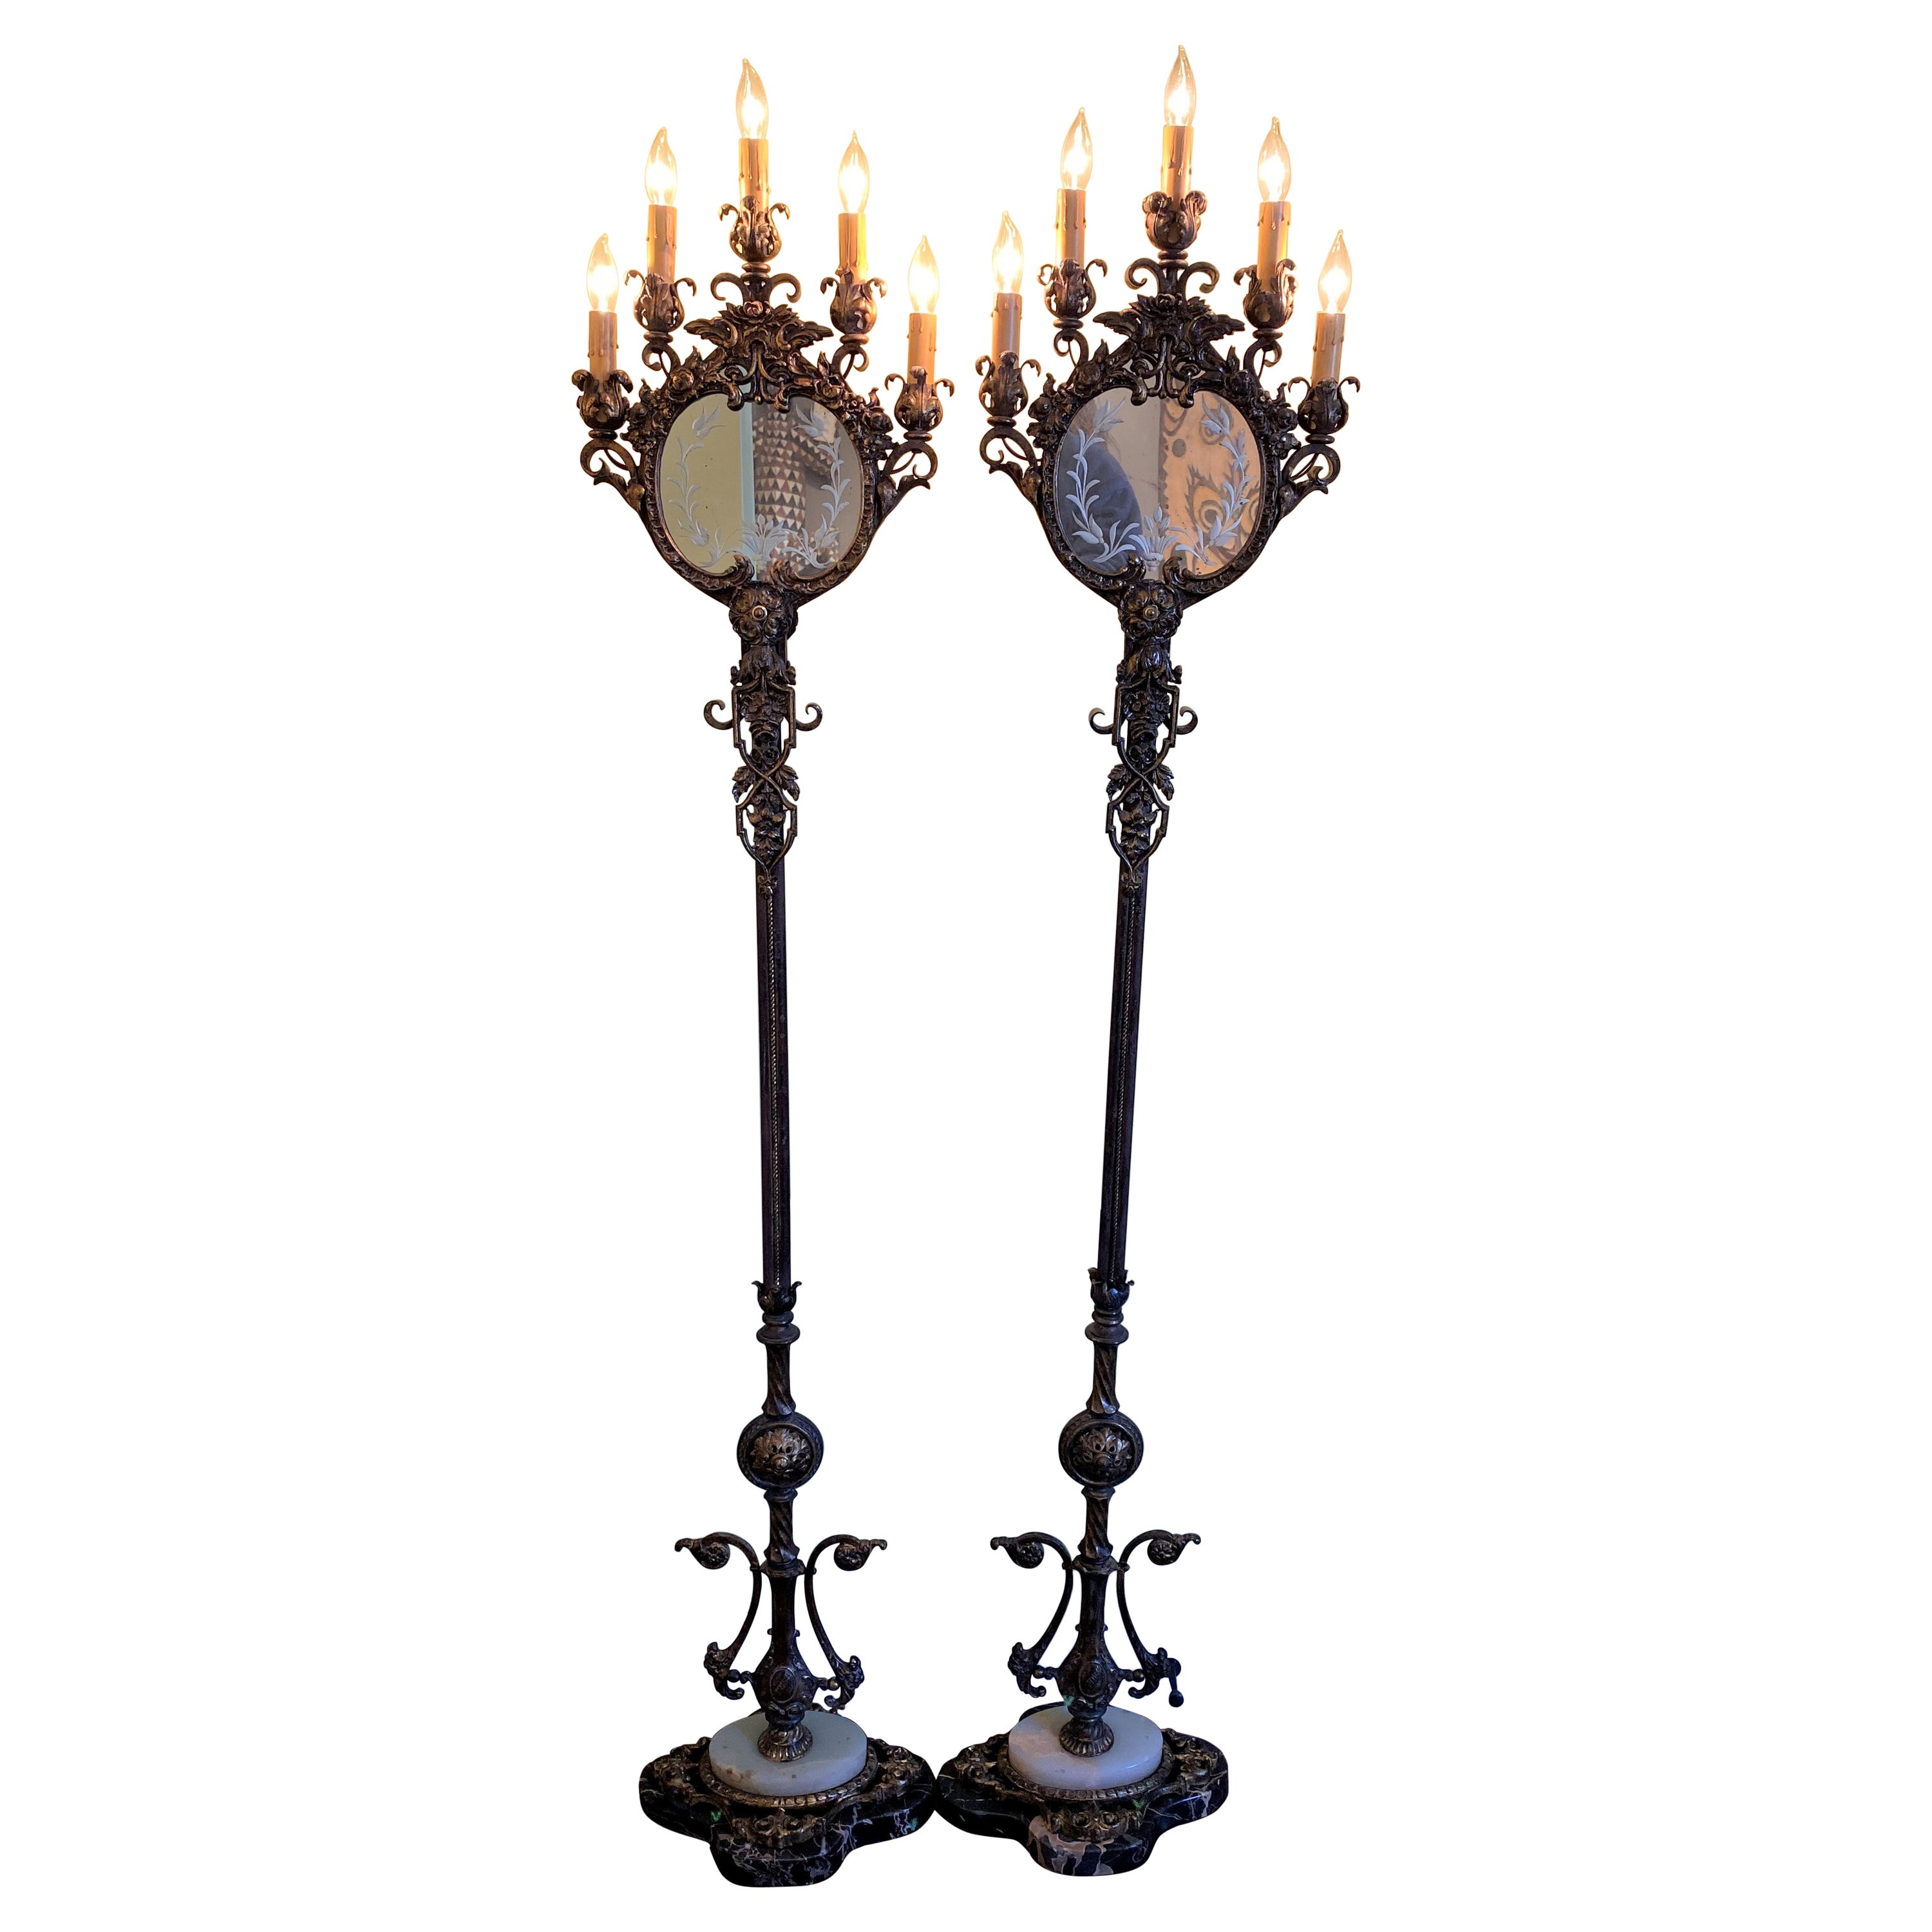 Pair of Early 20th Century Wrought Iron & Marble 5-Light Mirrored Torchieres